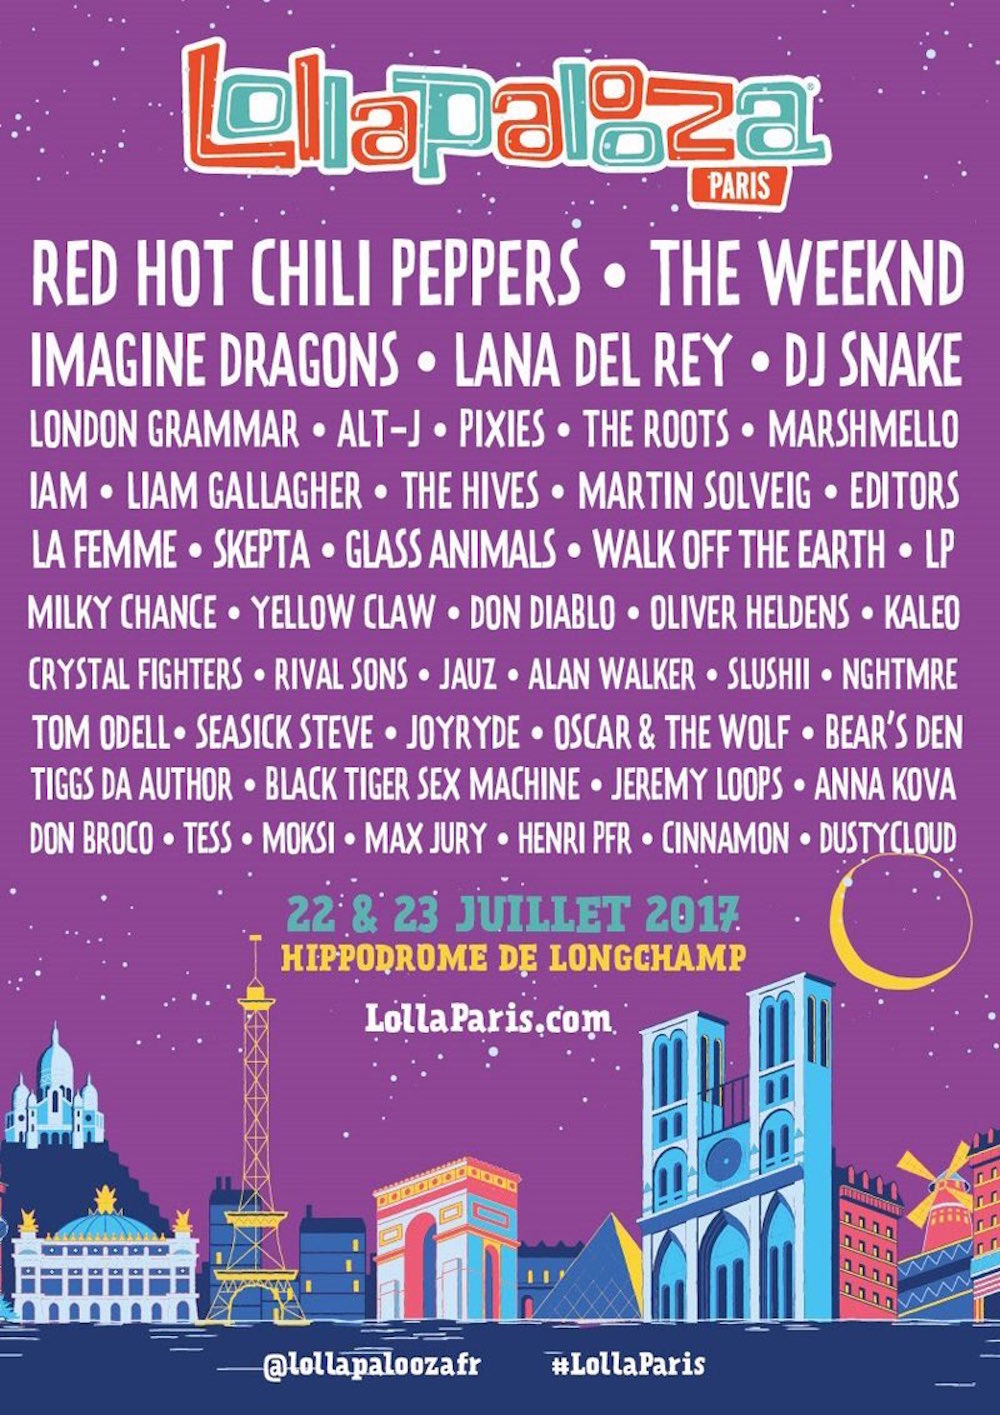 Lollapalooza Festival Expands to Paris, Adds Red Hot Chili Peppers and the Weeknd to Headline